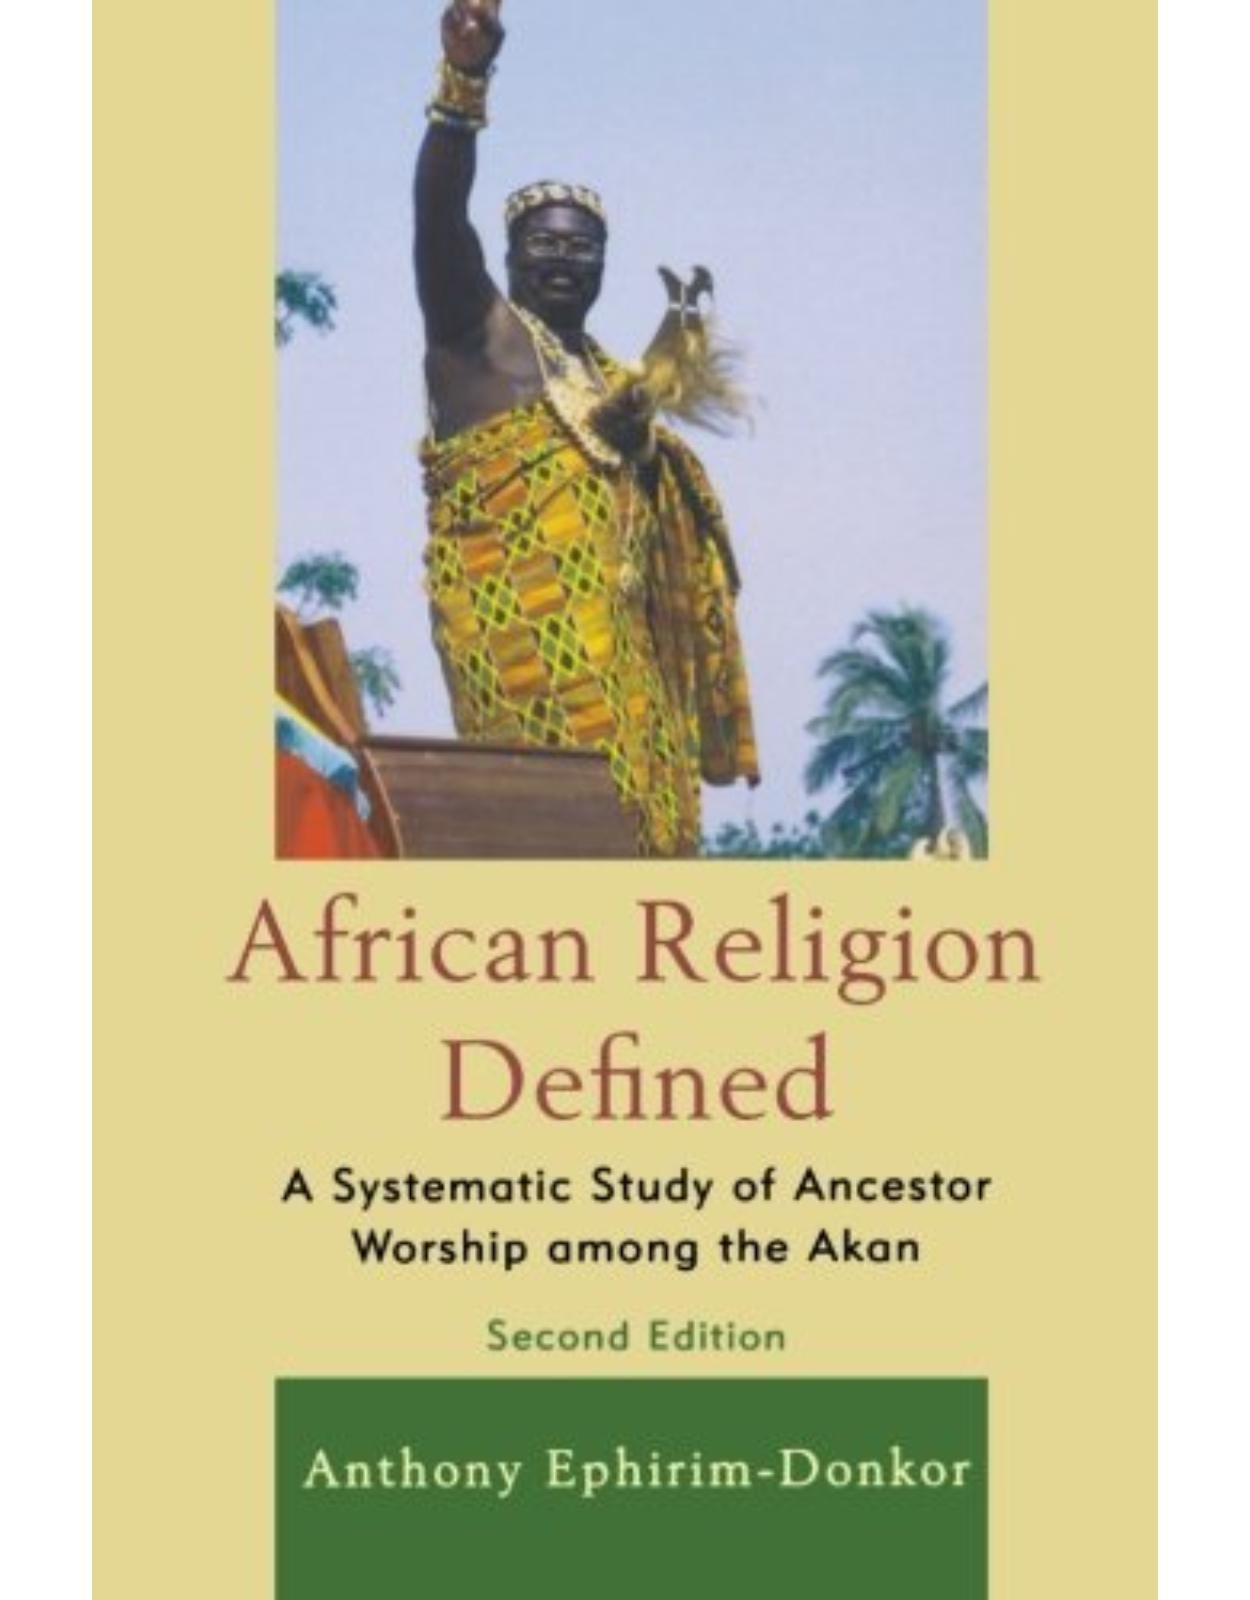 African Religion Defined: A Systematic Study of Ancestor Worship among the Akan, 2nd Edition